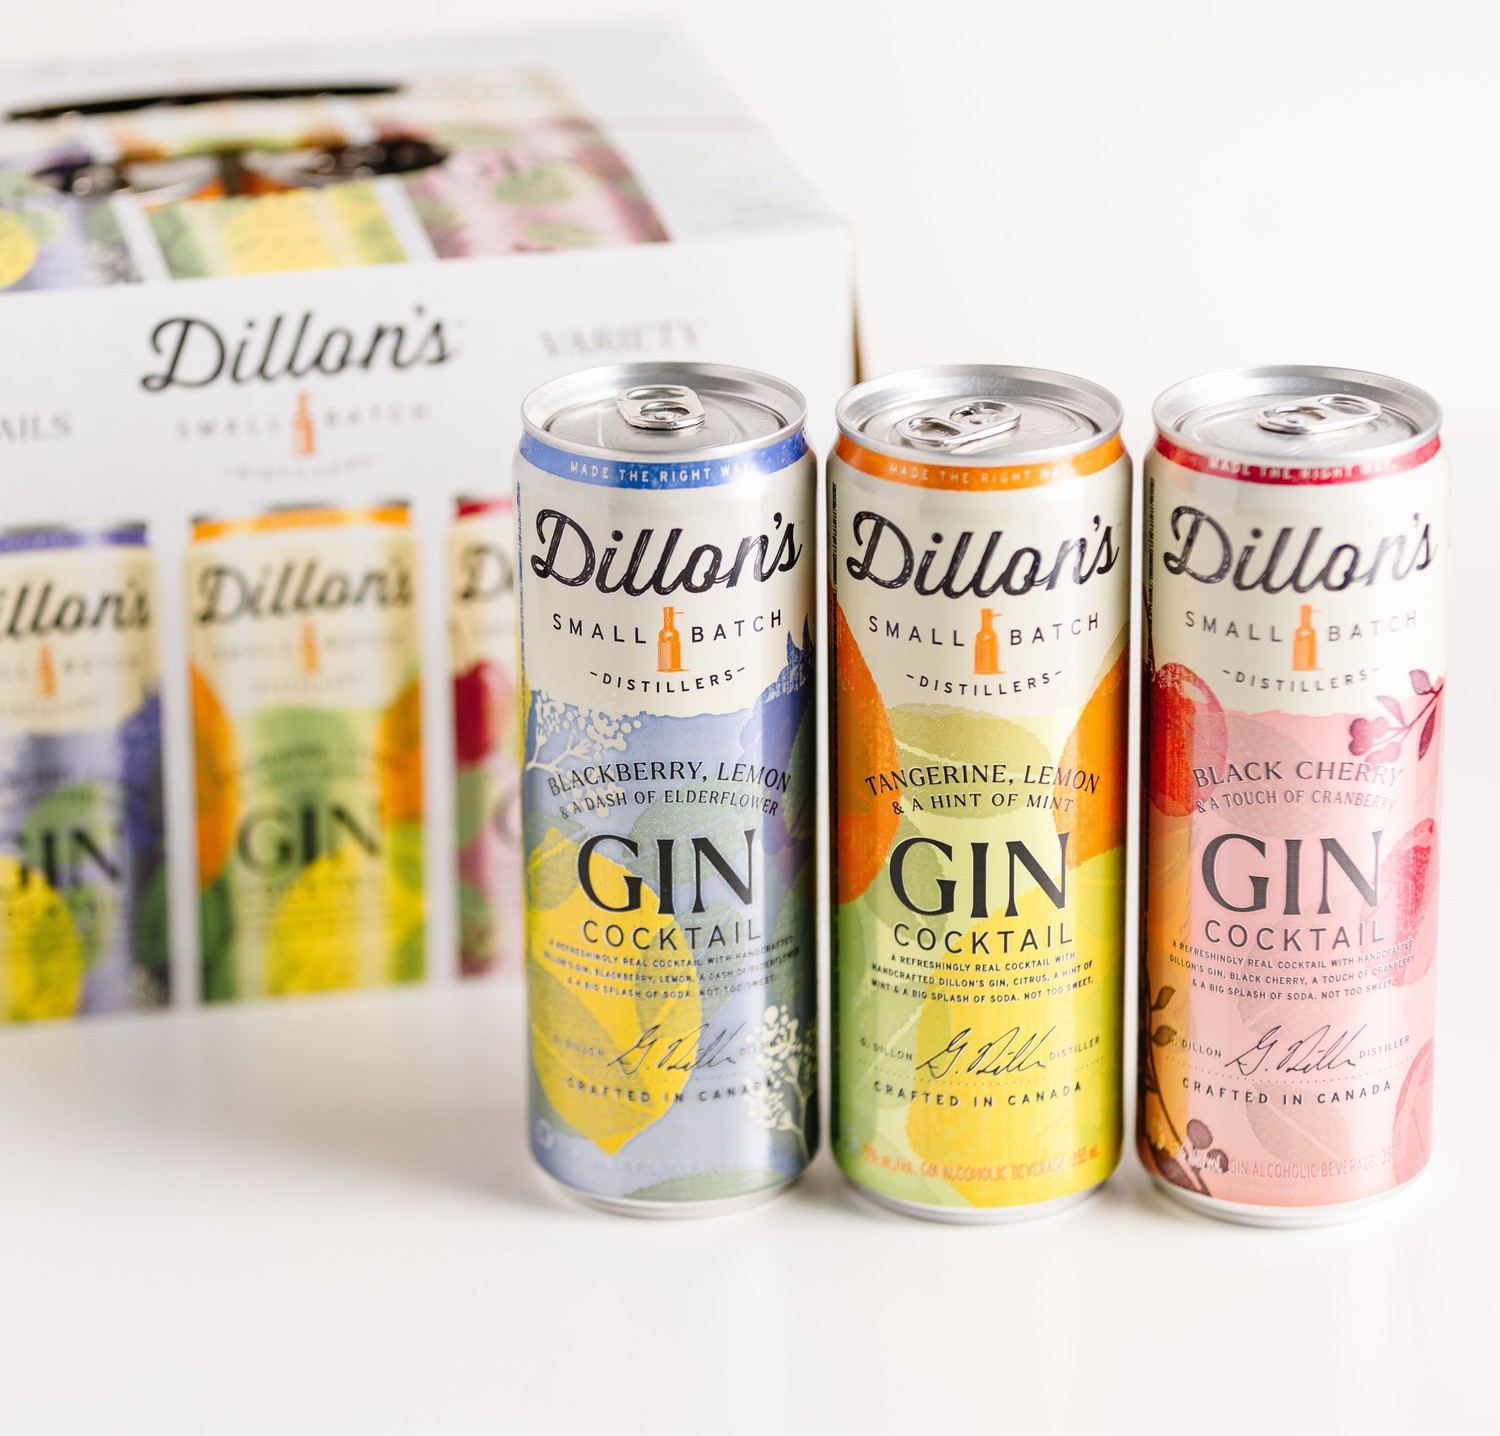 Three cans of Dillon's Gin cocktails in three flavours against a variety box of the canned drinks